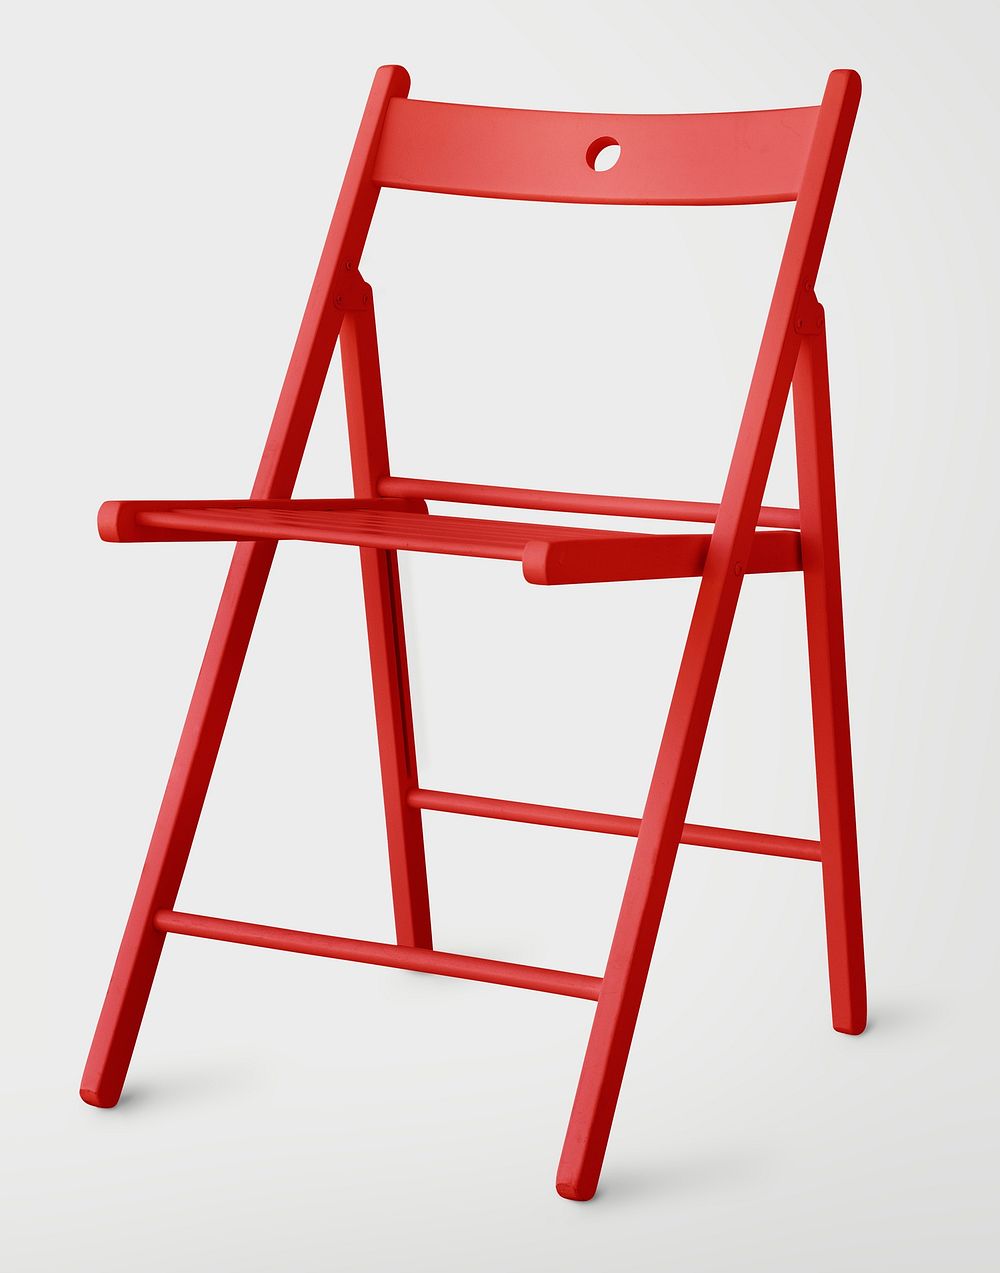 Modern red chair on off white background